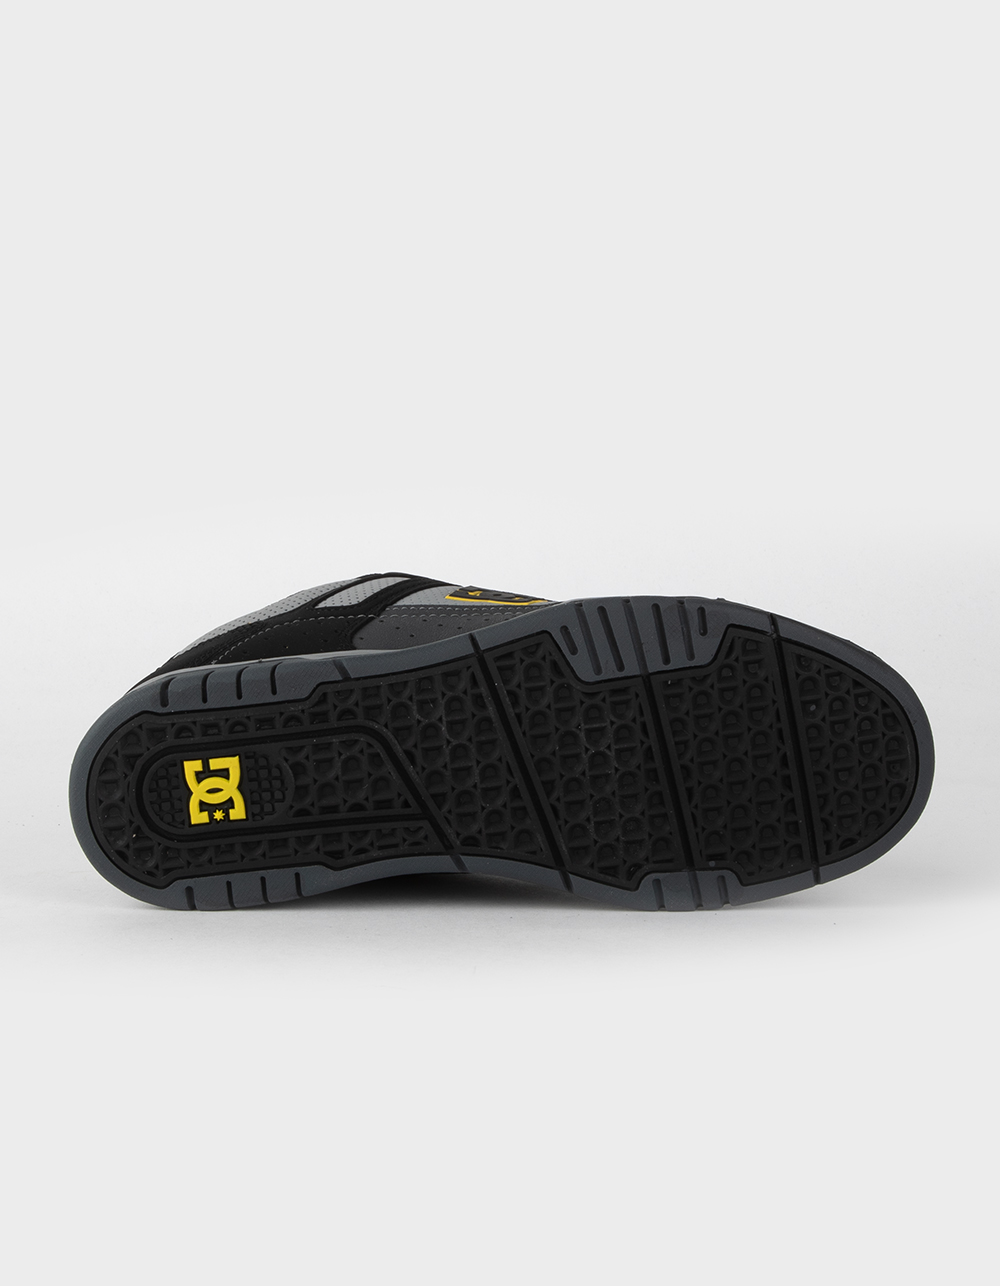 deseo Morbosidad vocal DC SHOES Stag Mens Shoes - BLK/GRY | Tillys